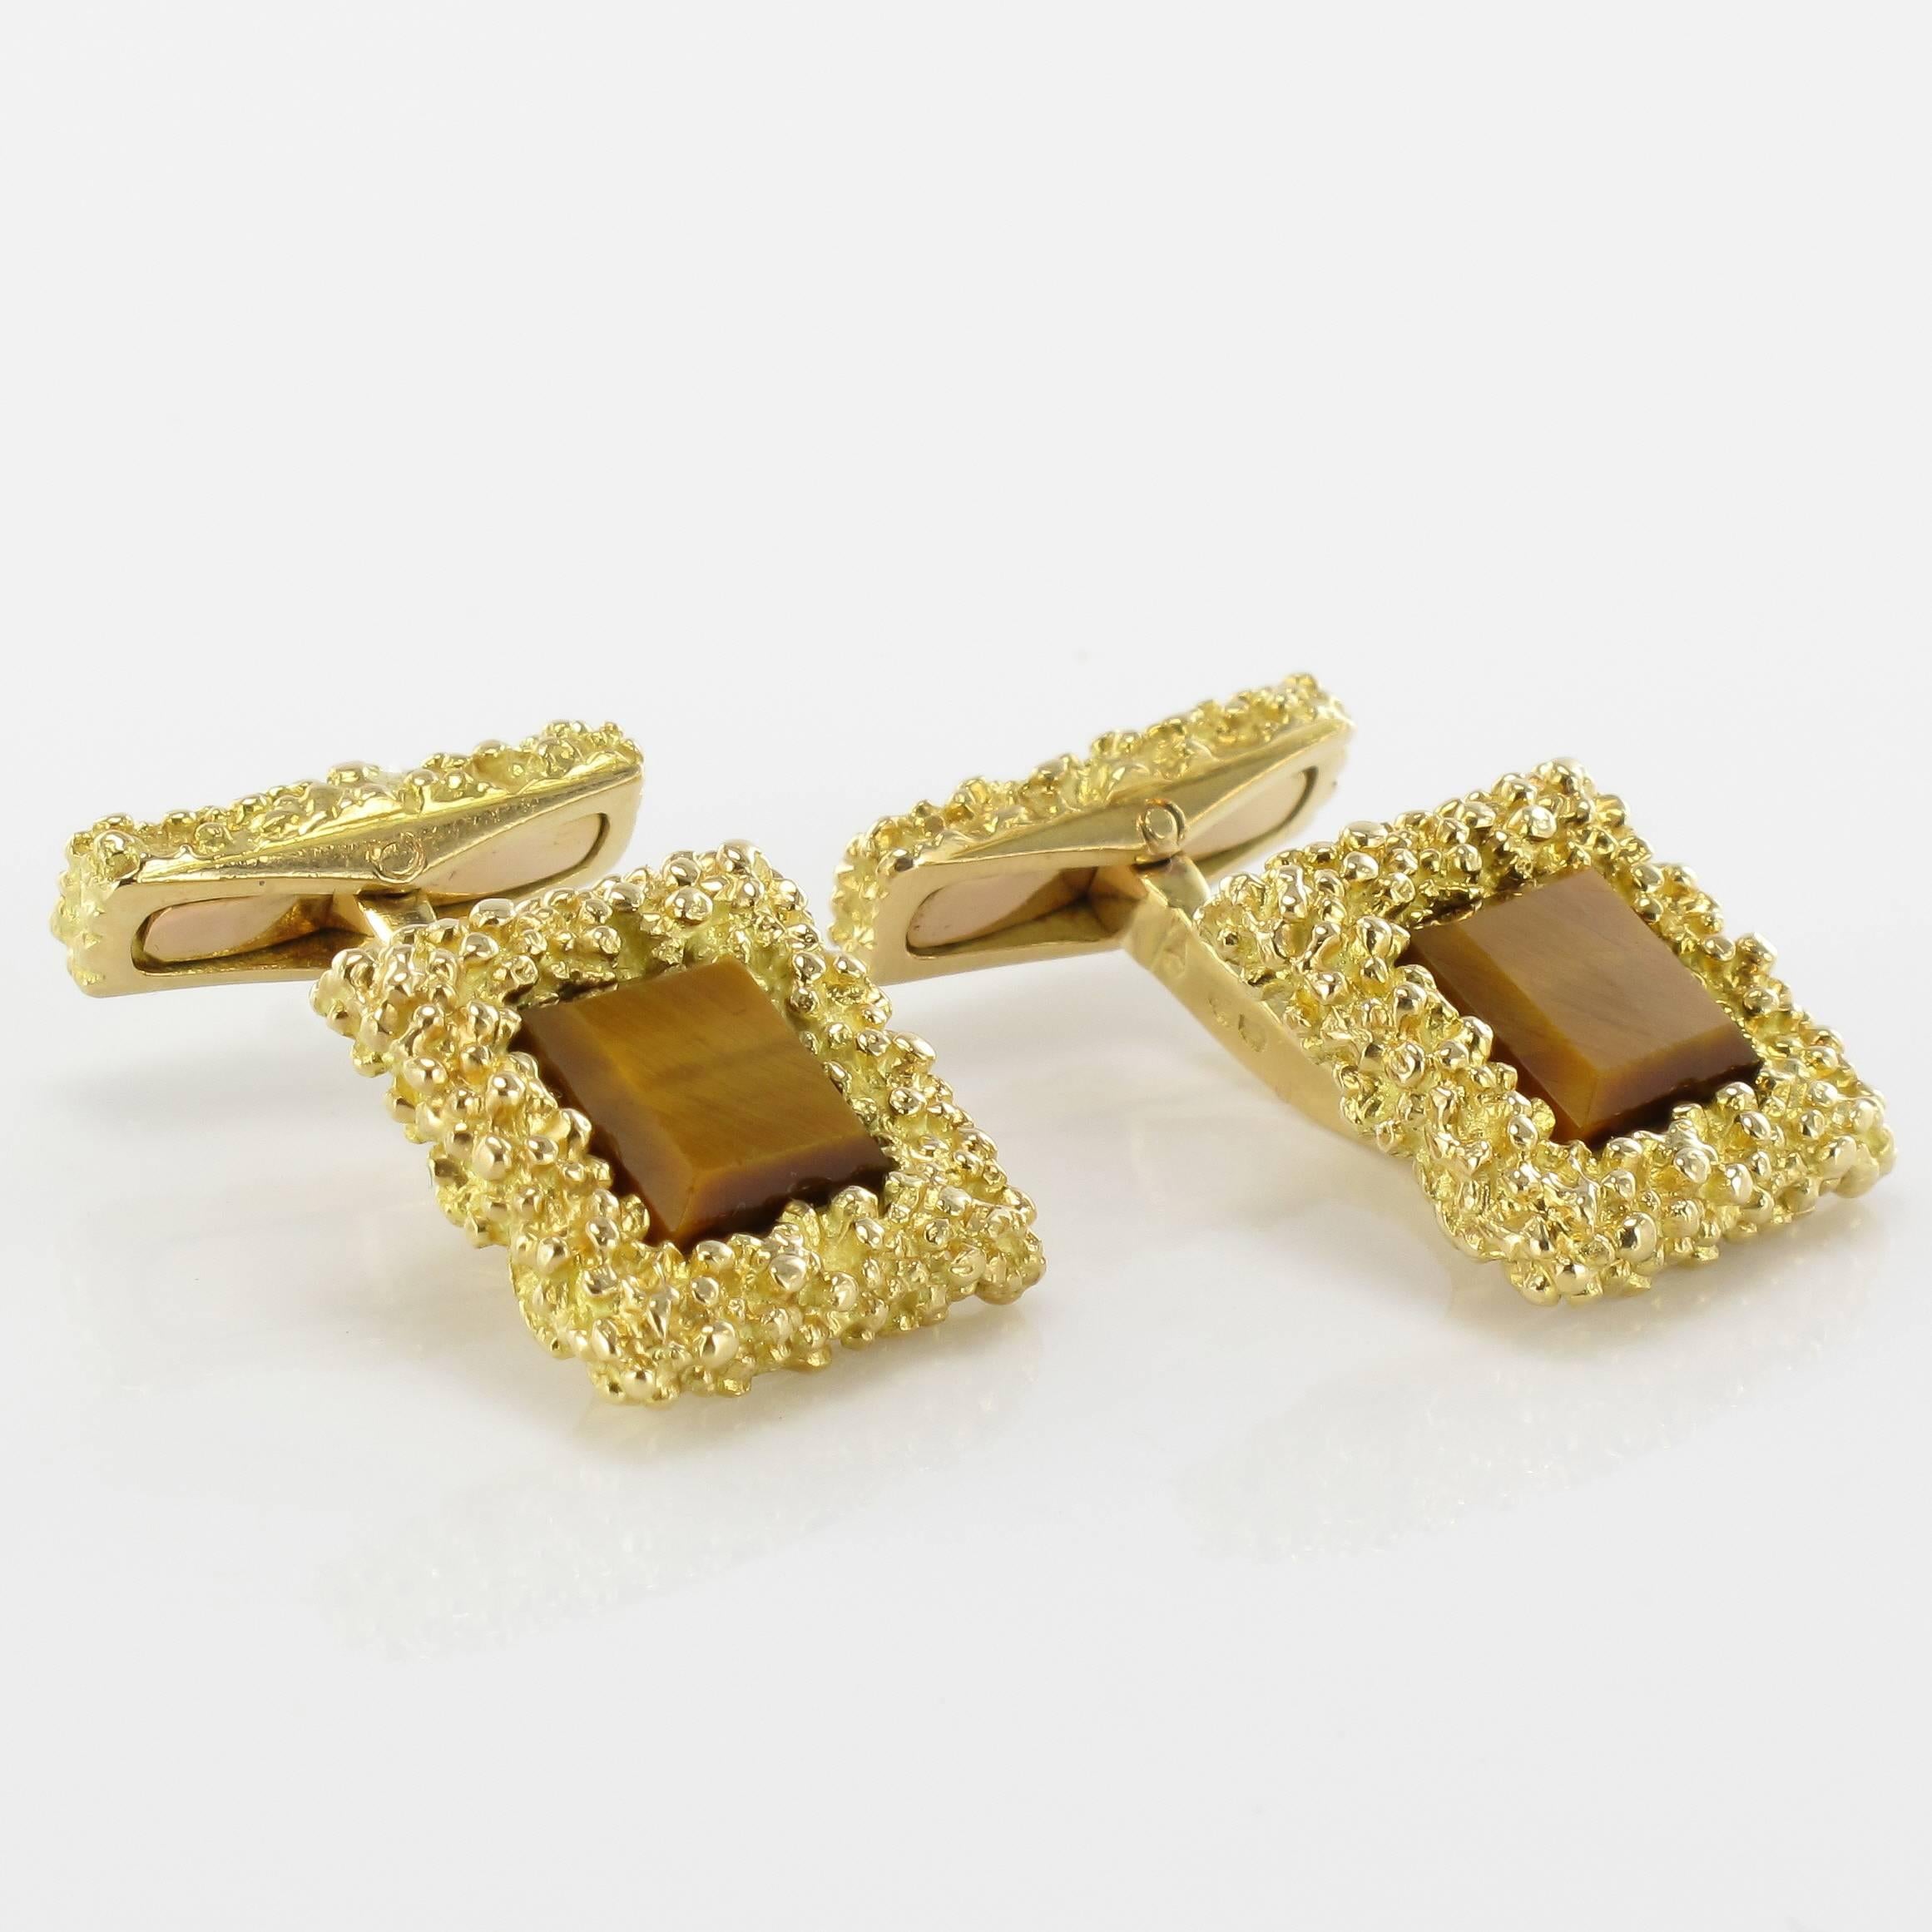 Cufflinks in 18 carat yellow gold. 

Each splendid square cufflink features a textured motif of gold beads set around a square tiger’s eye quartz. The bar also features this textured gold. 

Dimension of the square motif: 1.5 cm side, Thickness 5